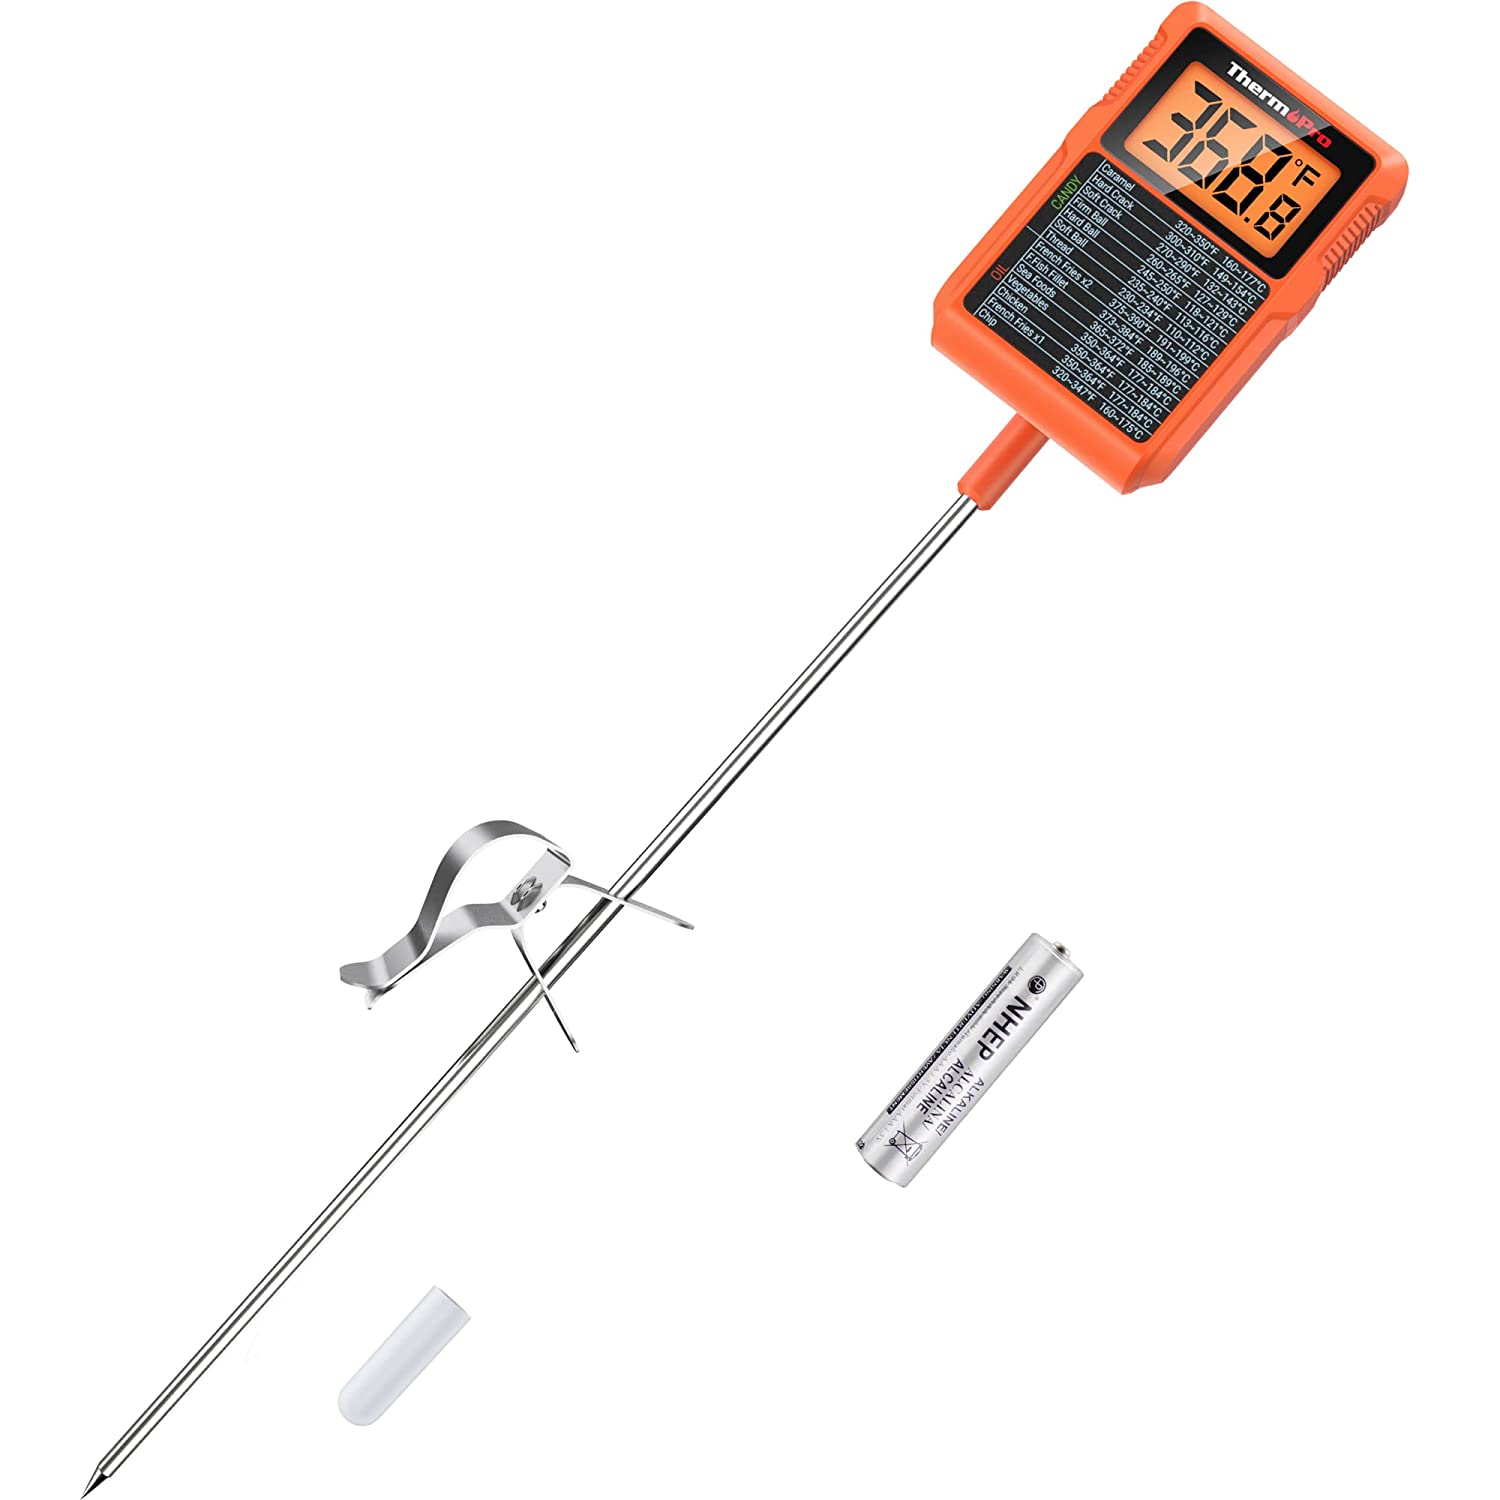 ThermoPro TP16S Digital Meat Thermometer Accurate Candy Thermometer Smoker 